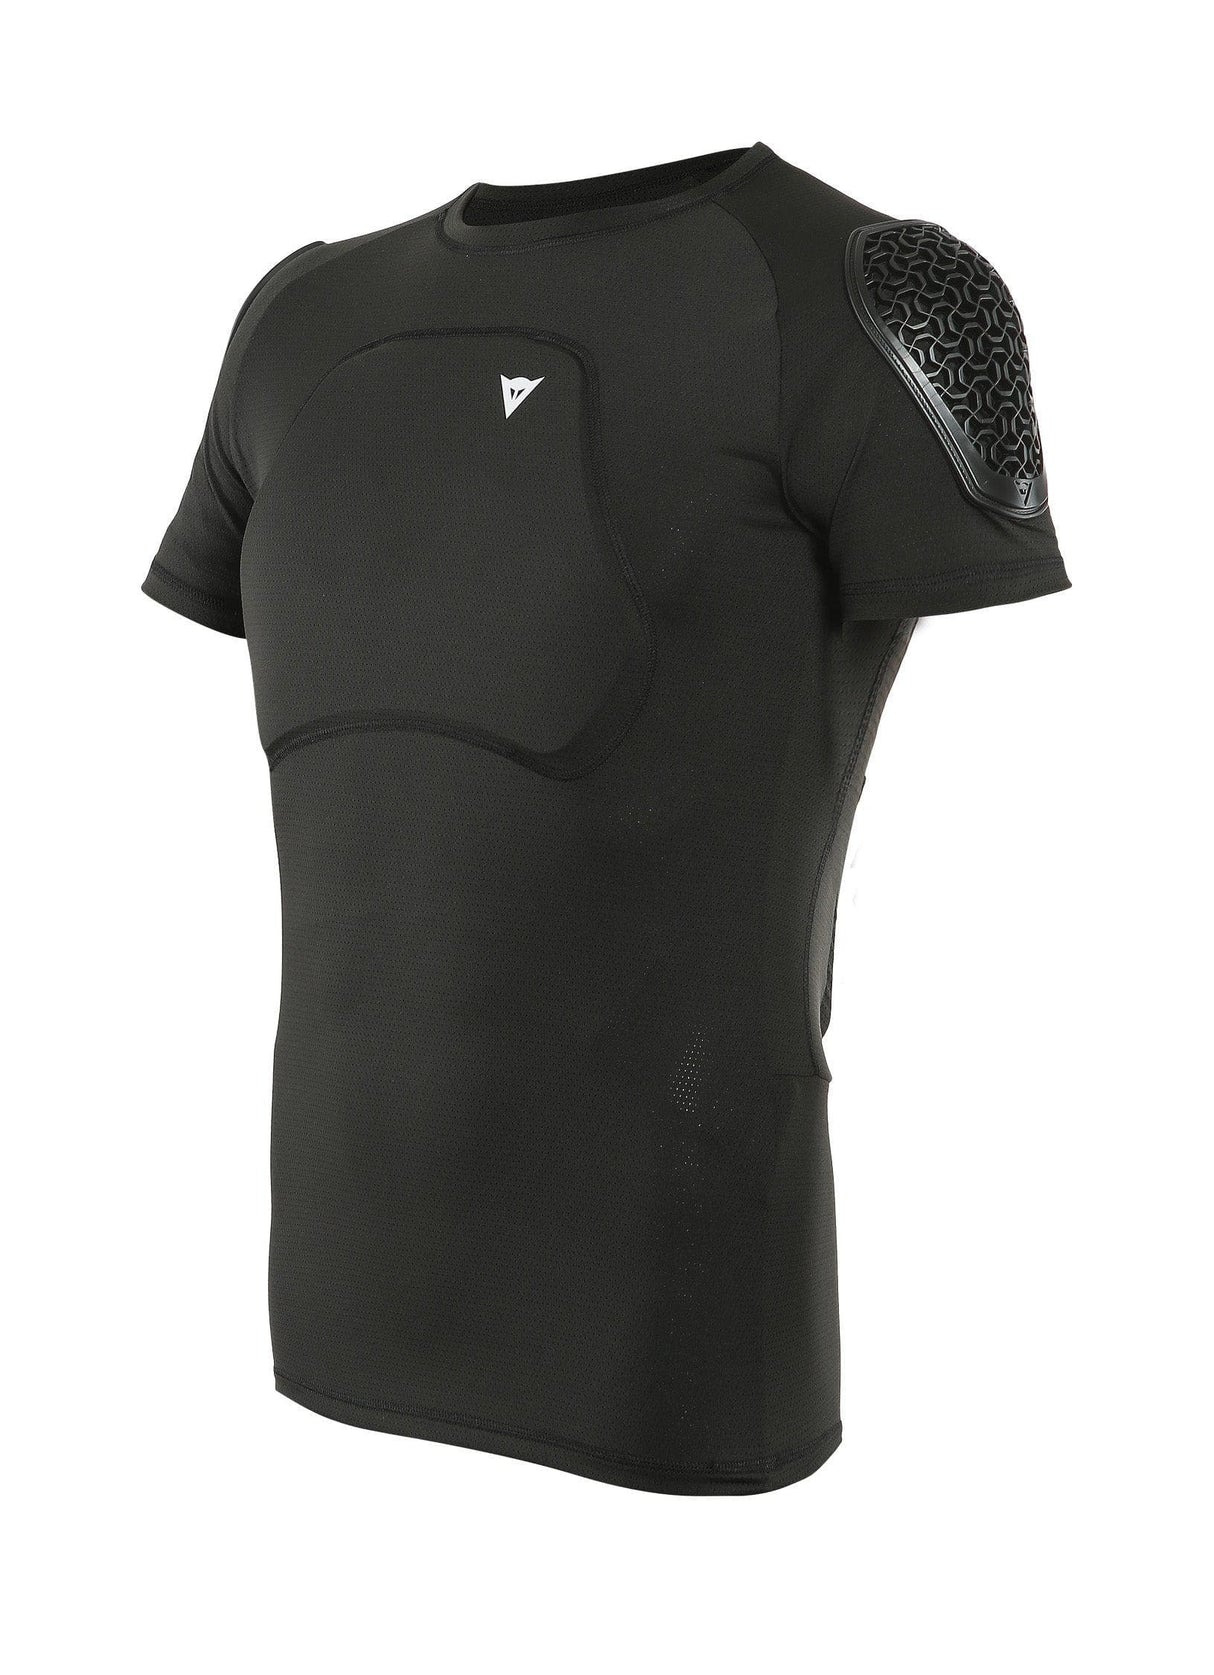 Dainese Trail Skins Pro Tee Armour (Black, XL)